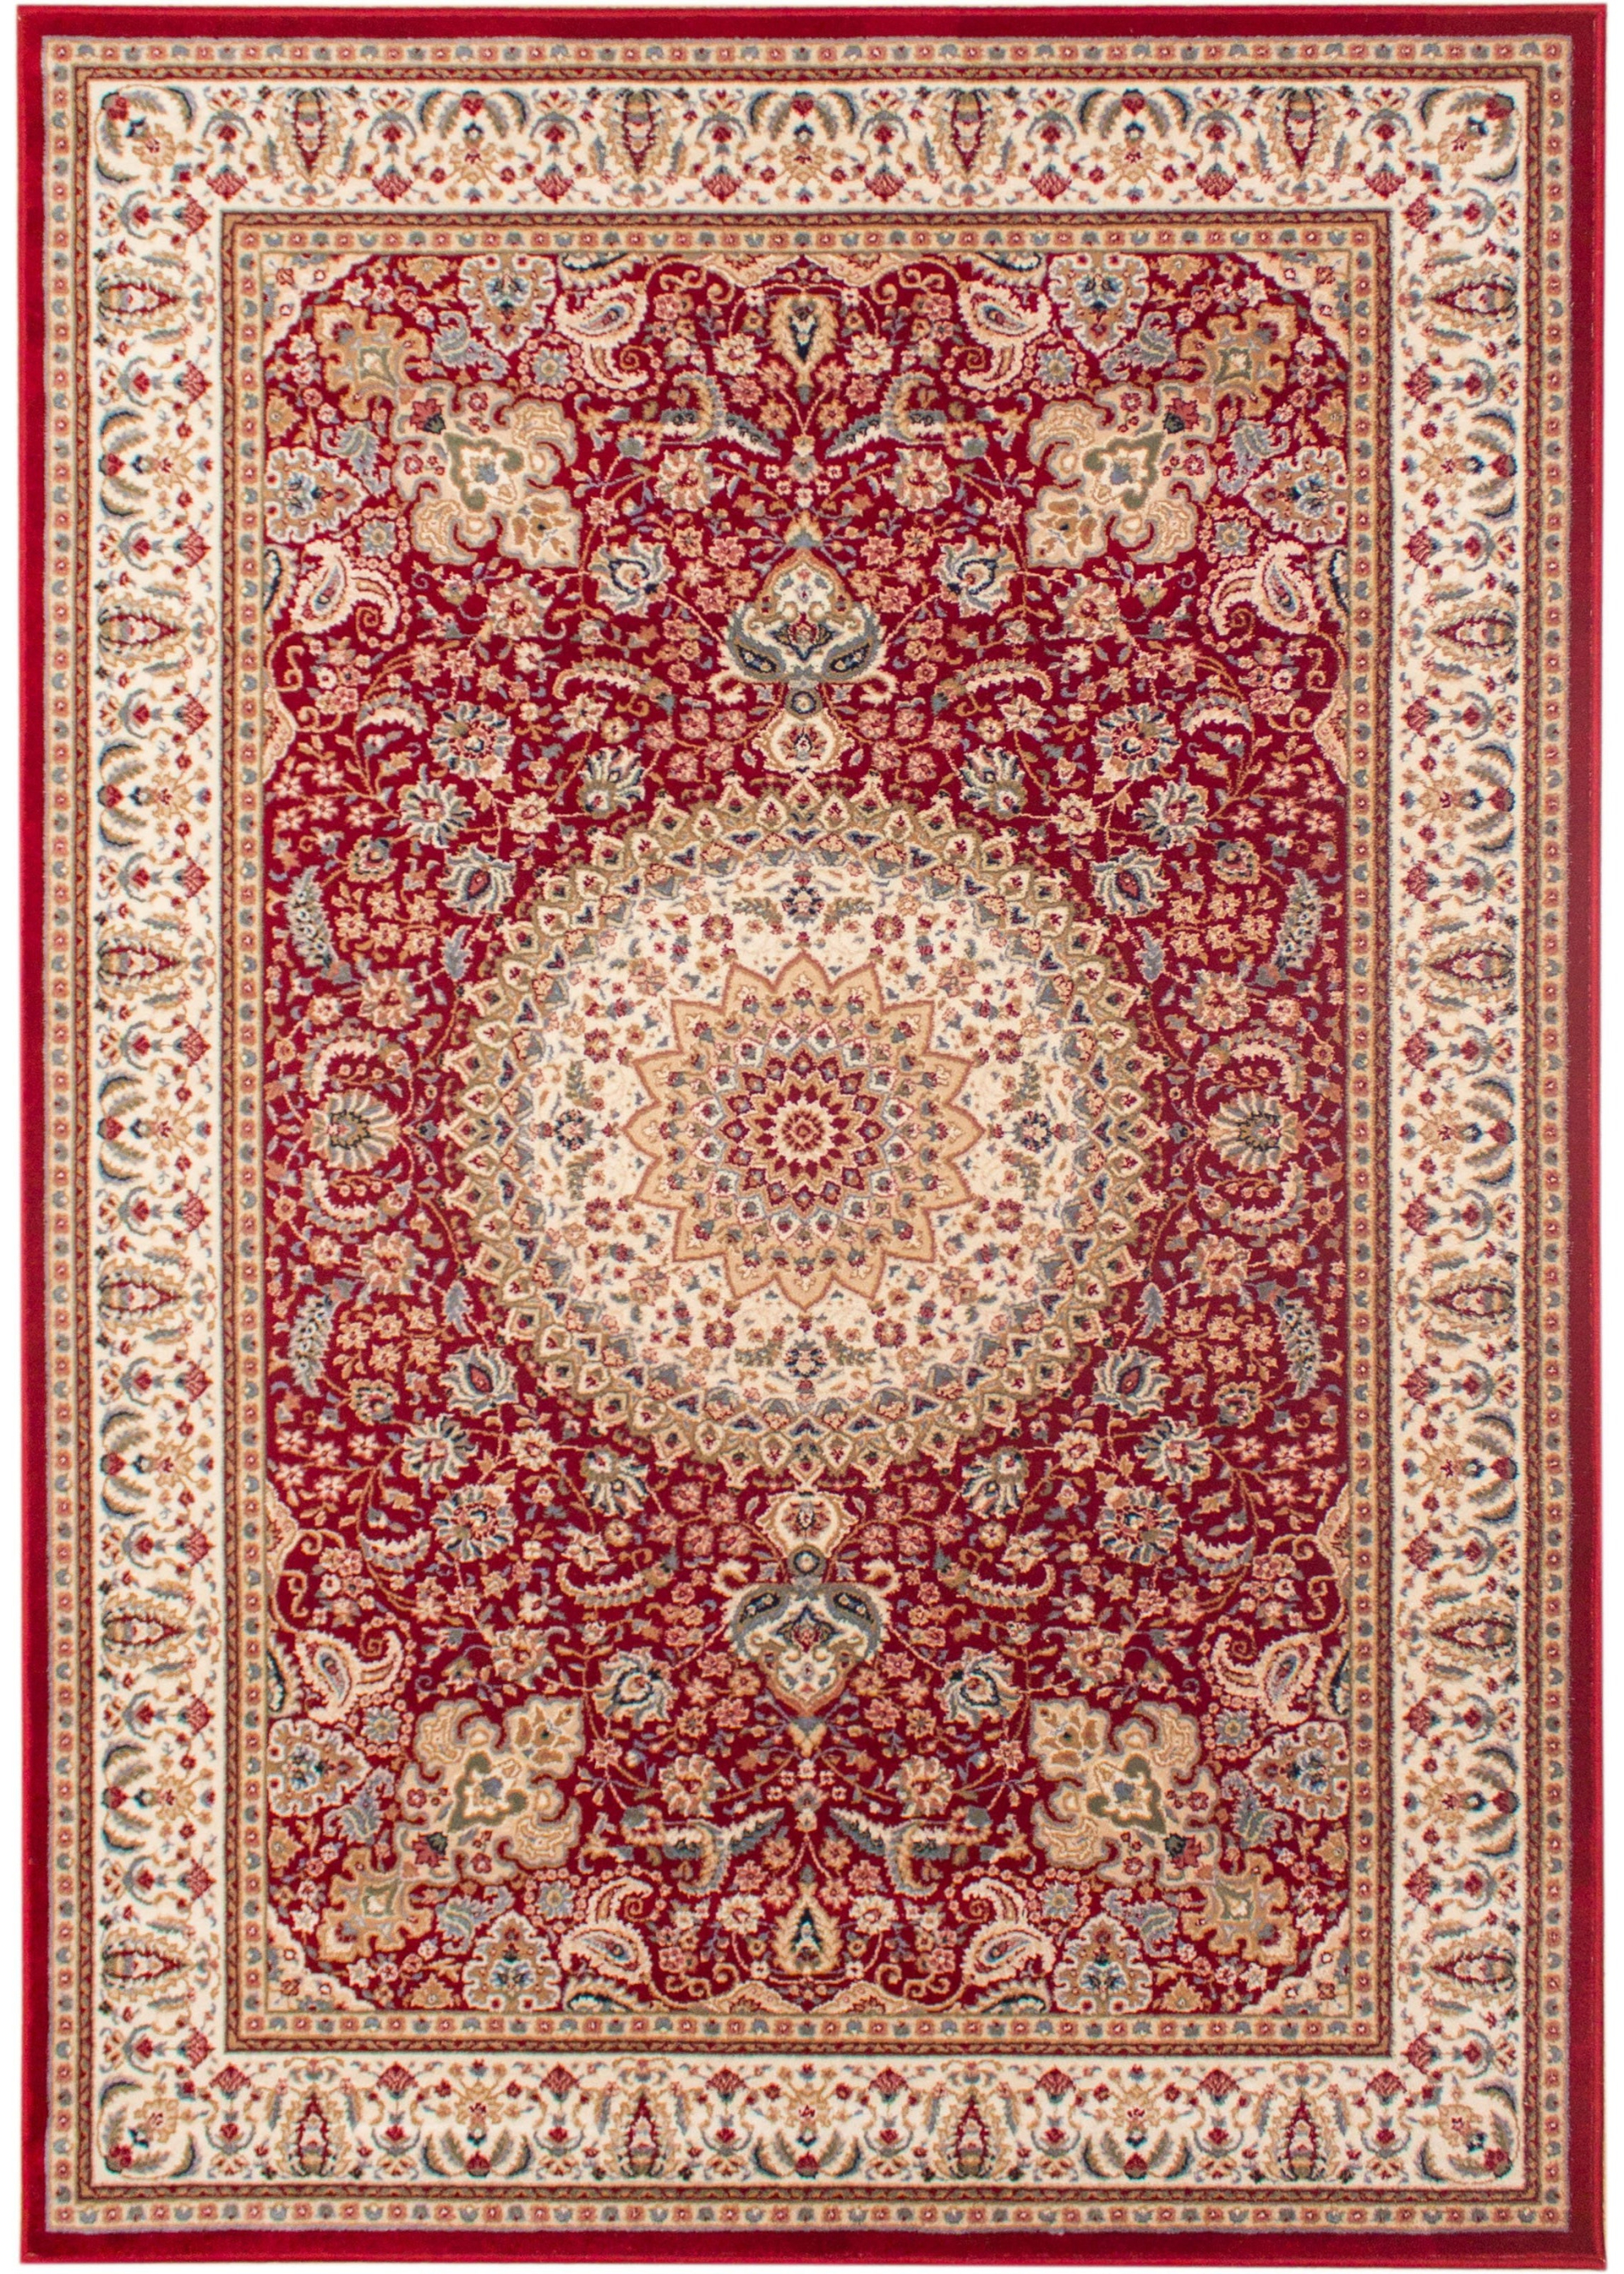 Premiera Woven Rug-Area rug for living room, dining area, and bedroom